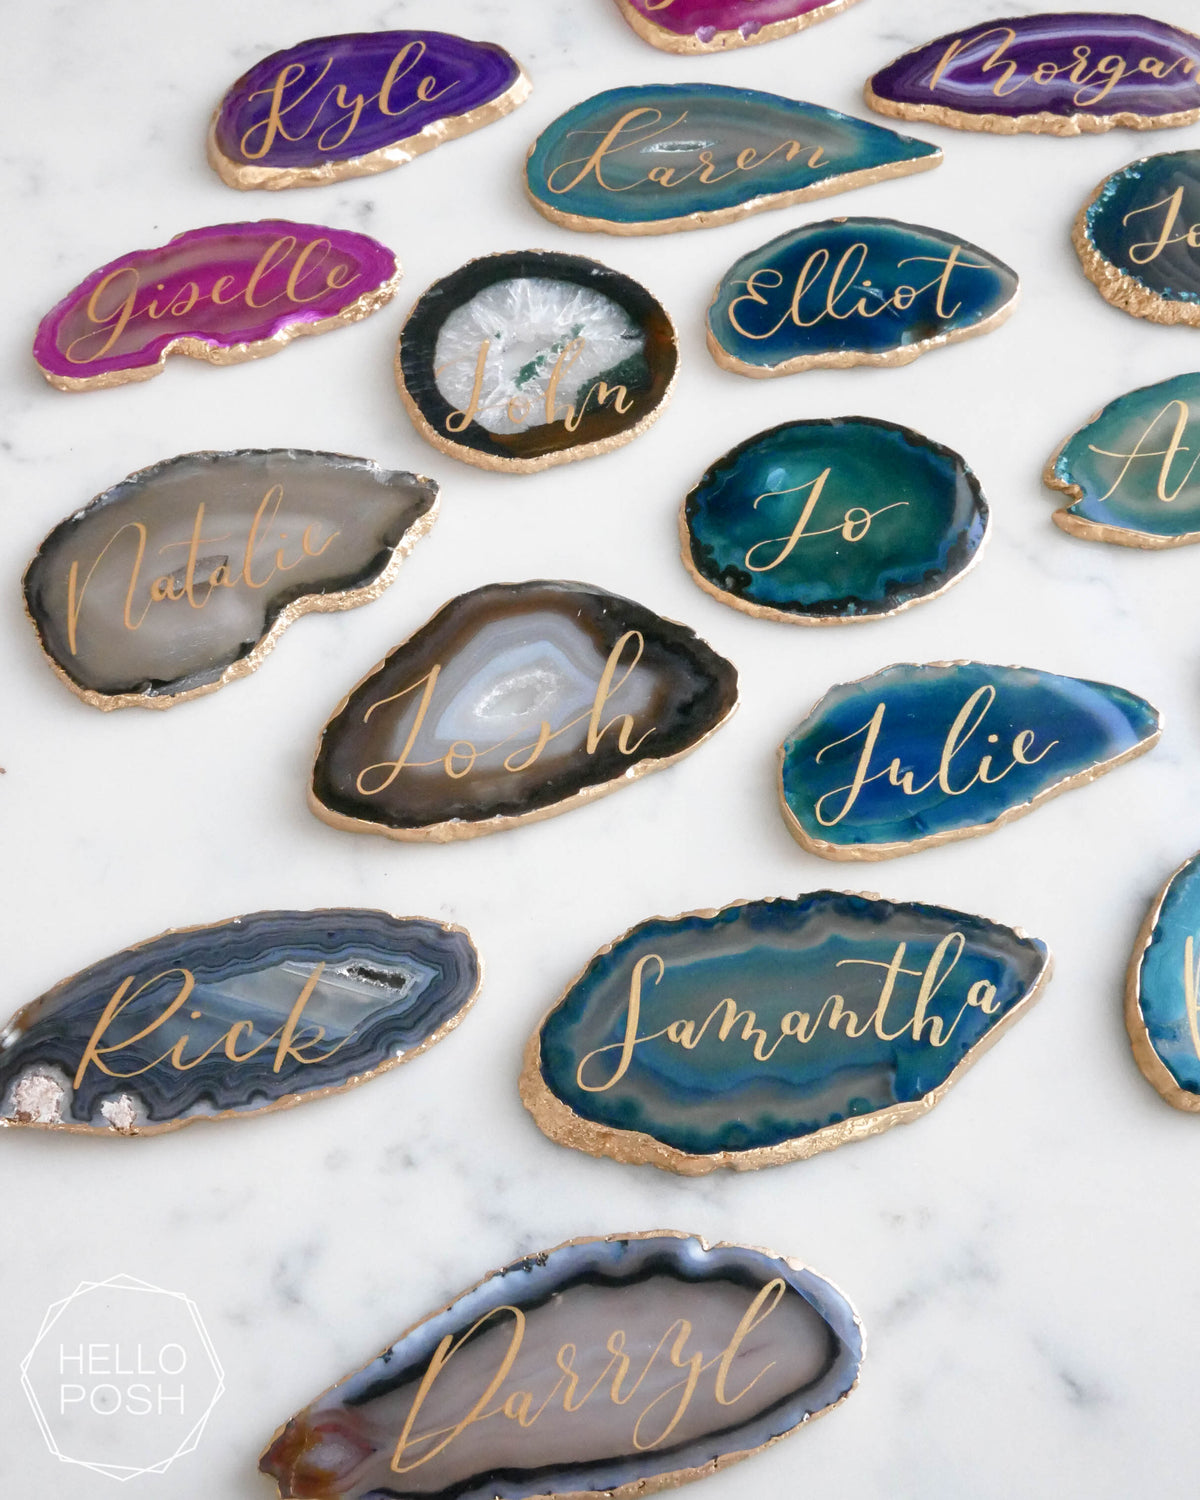 Gold gilded agate place cards